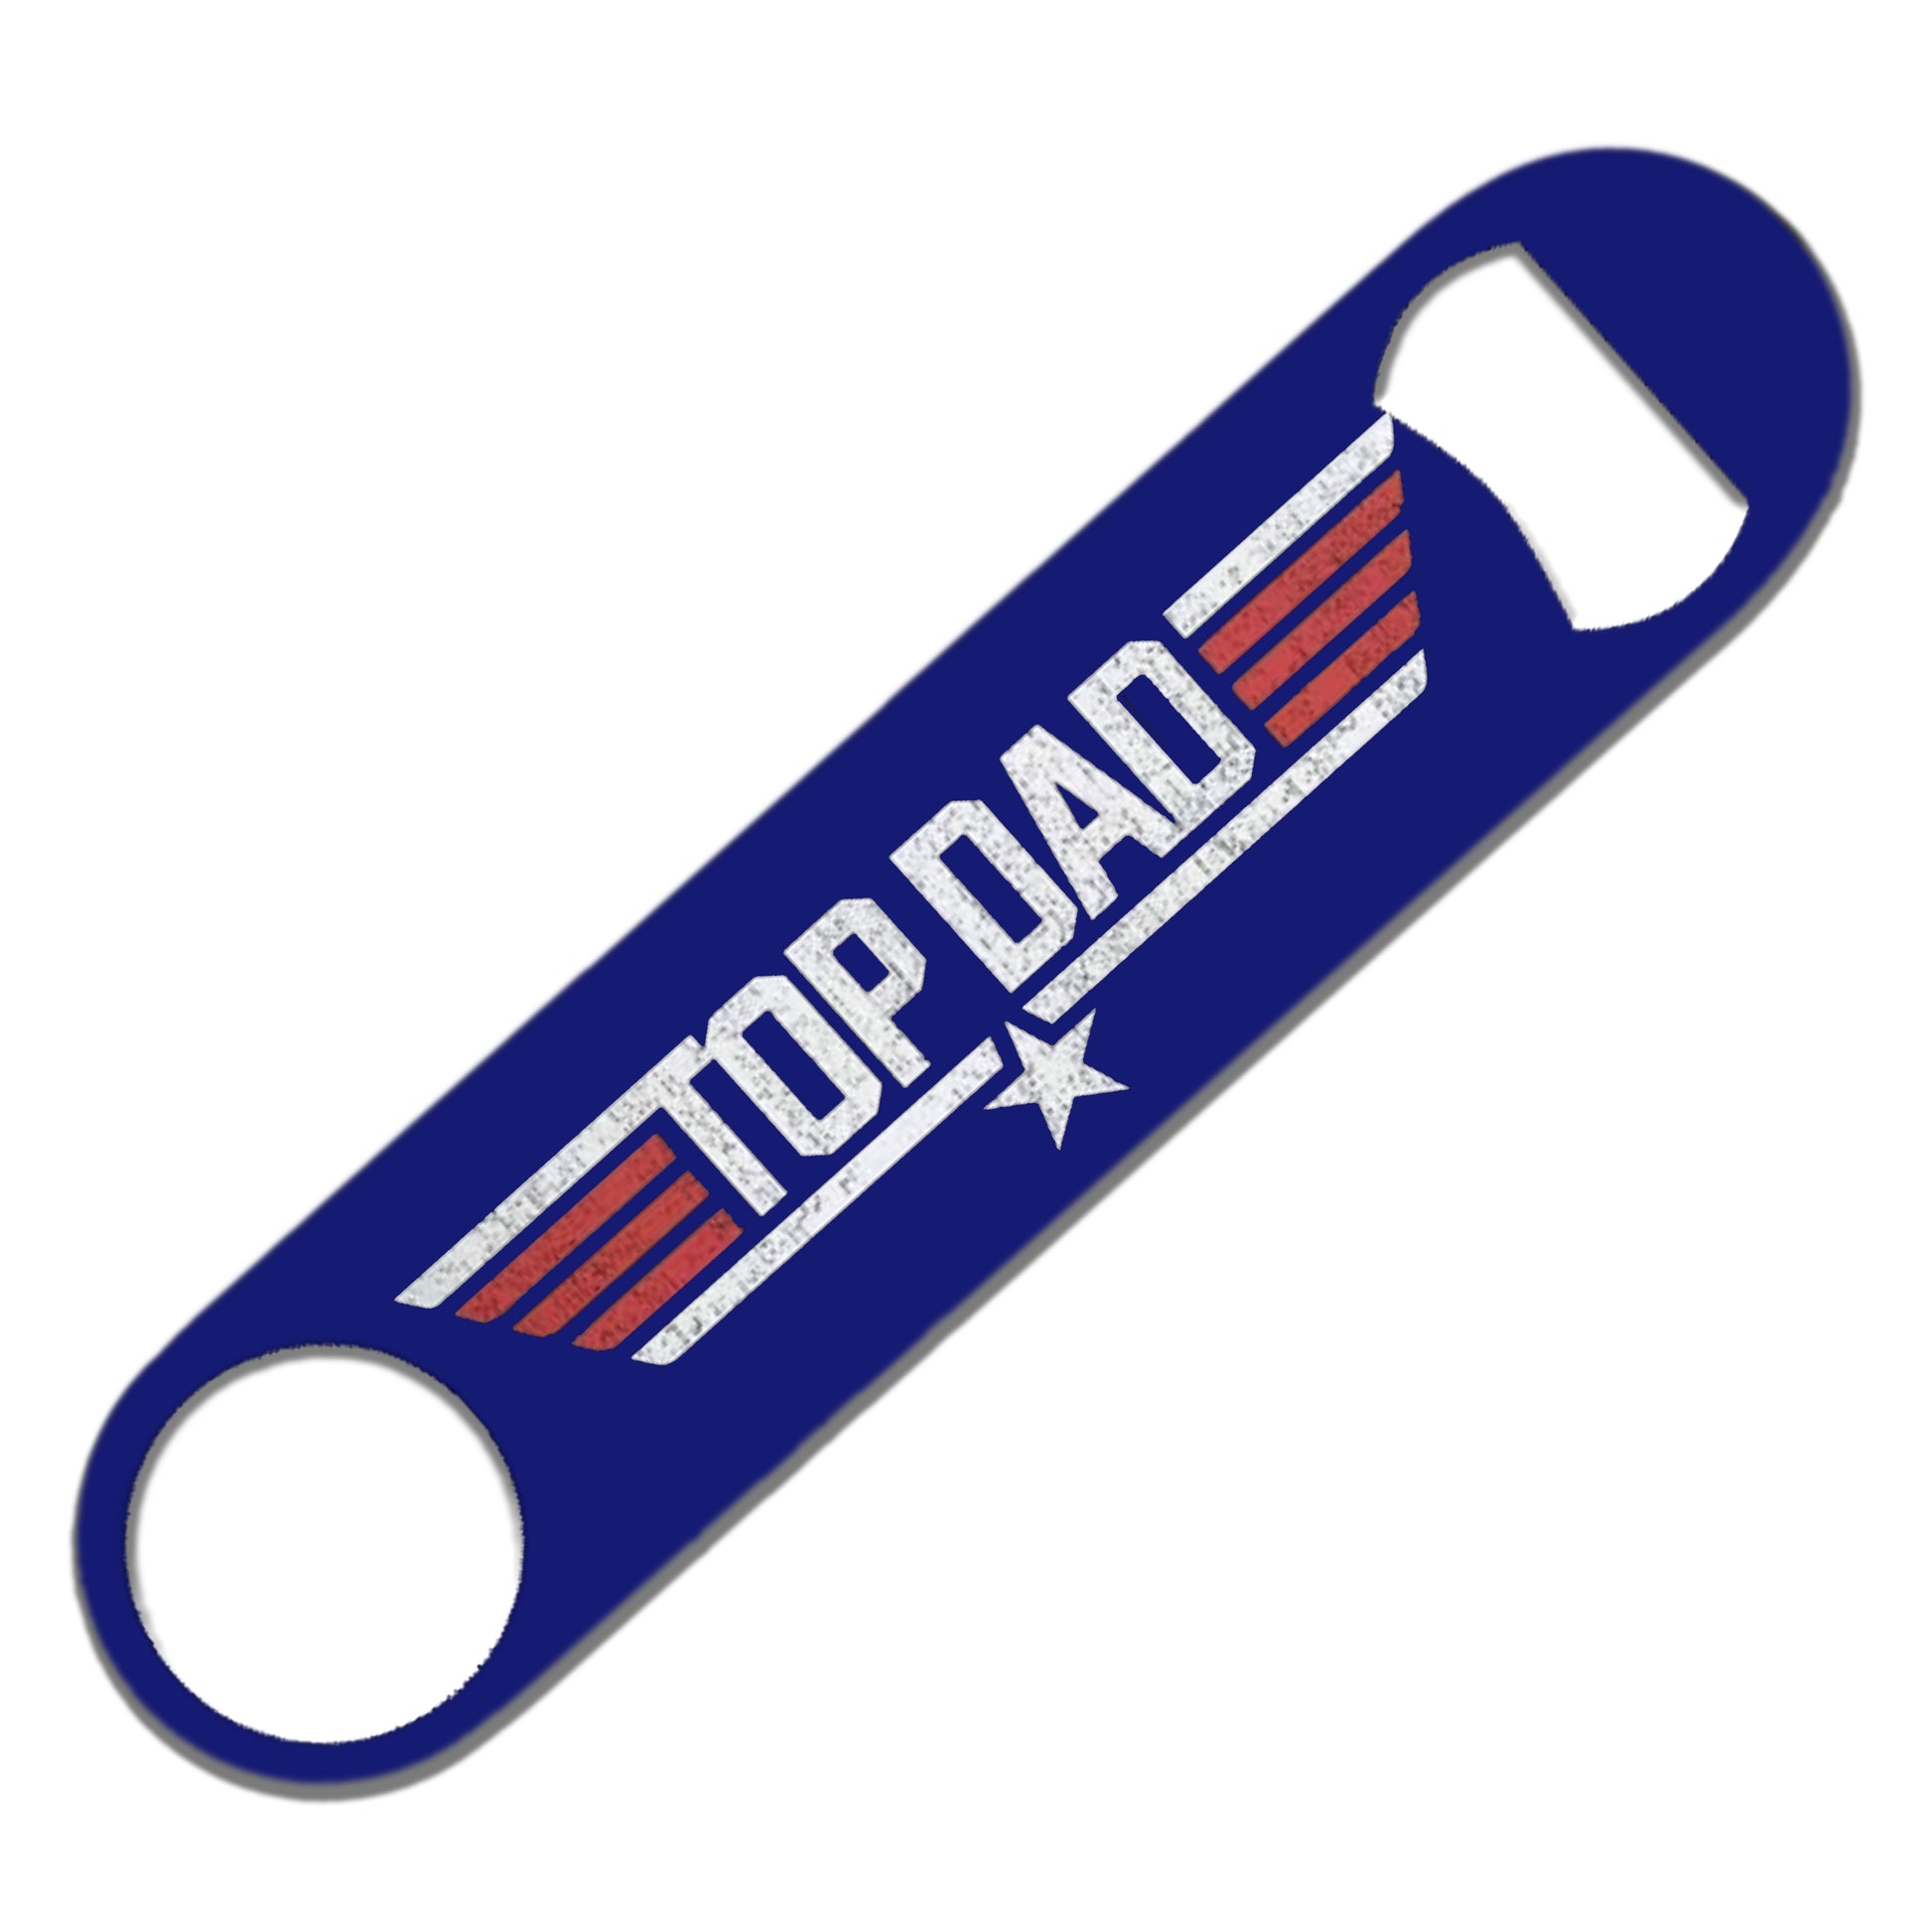 Top Dad Bottle Opener Father's Day Birthday Gift for Him